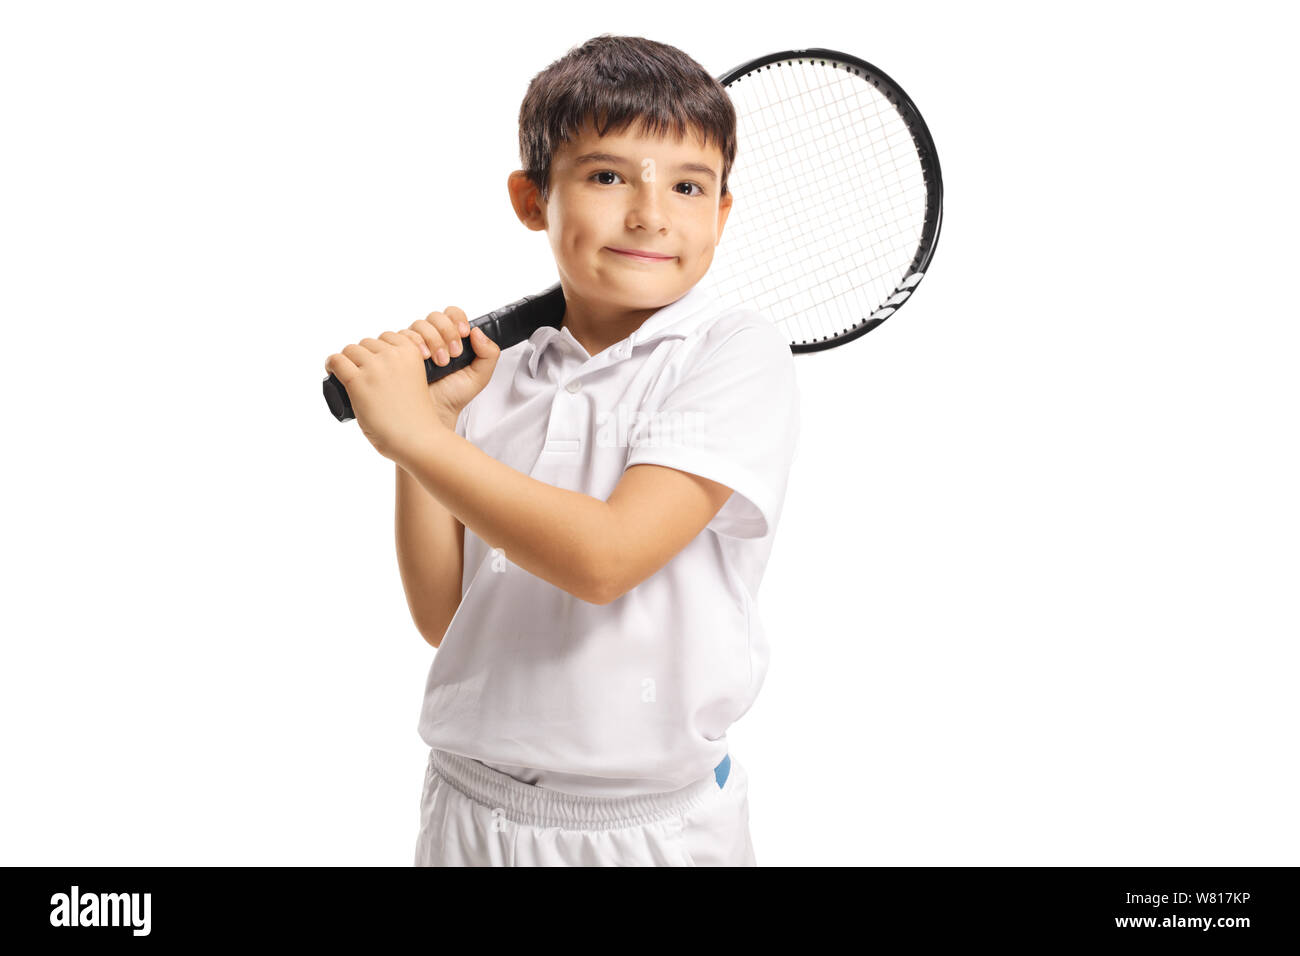 Boy holding a tennis racket isolated on white background Stock Photo